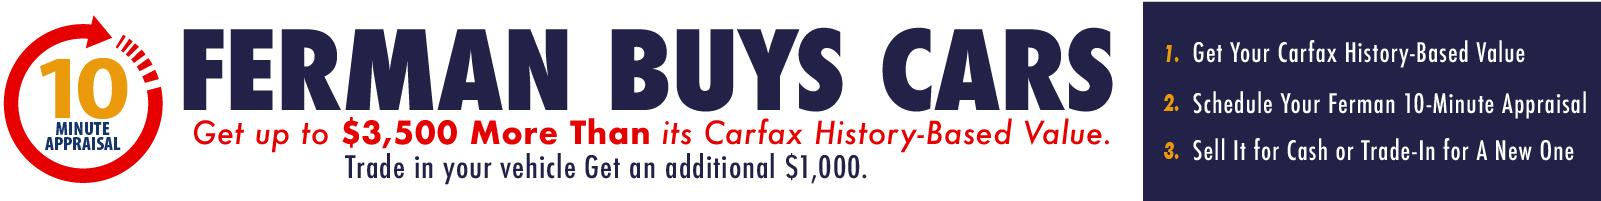 10 Minute Appraisal. Get up to $3,500 more than your Carfax History-Based Value. Ferman Chevrolet of Tarpon Springs Buys Cars